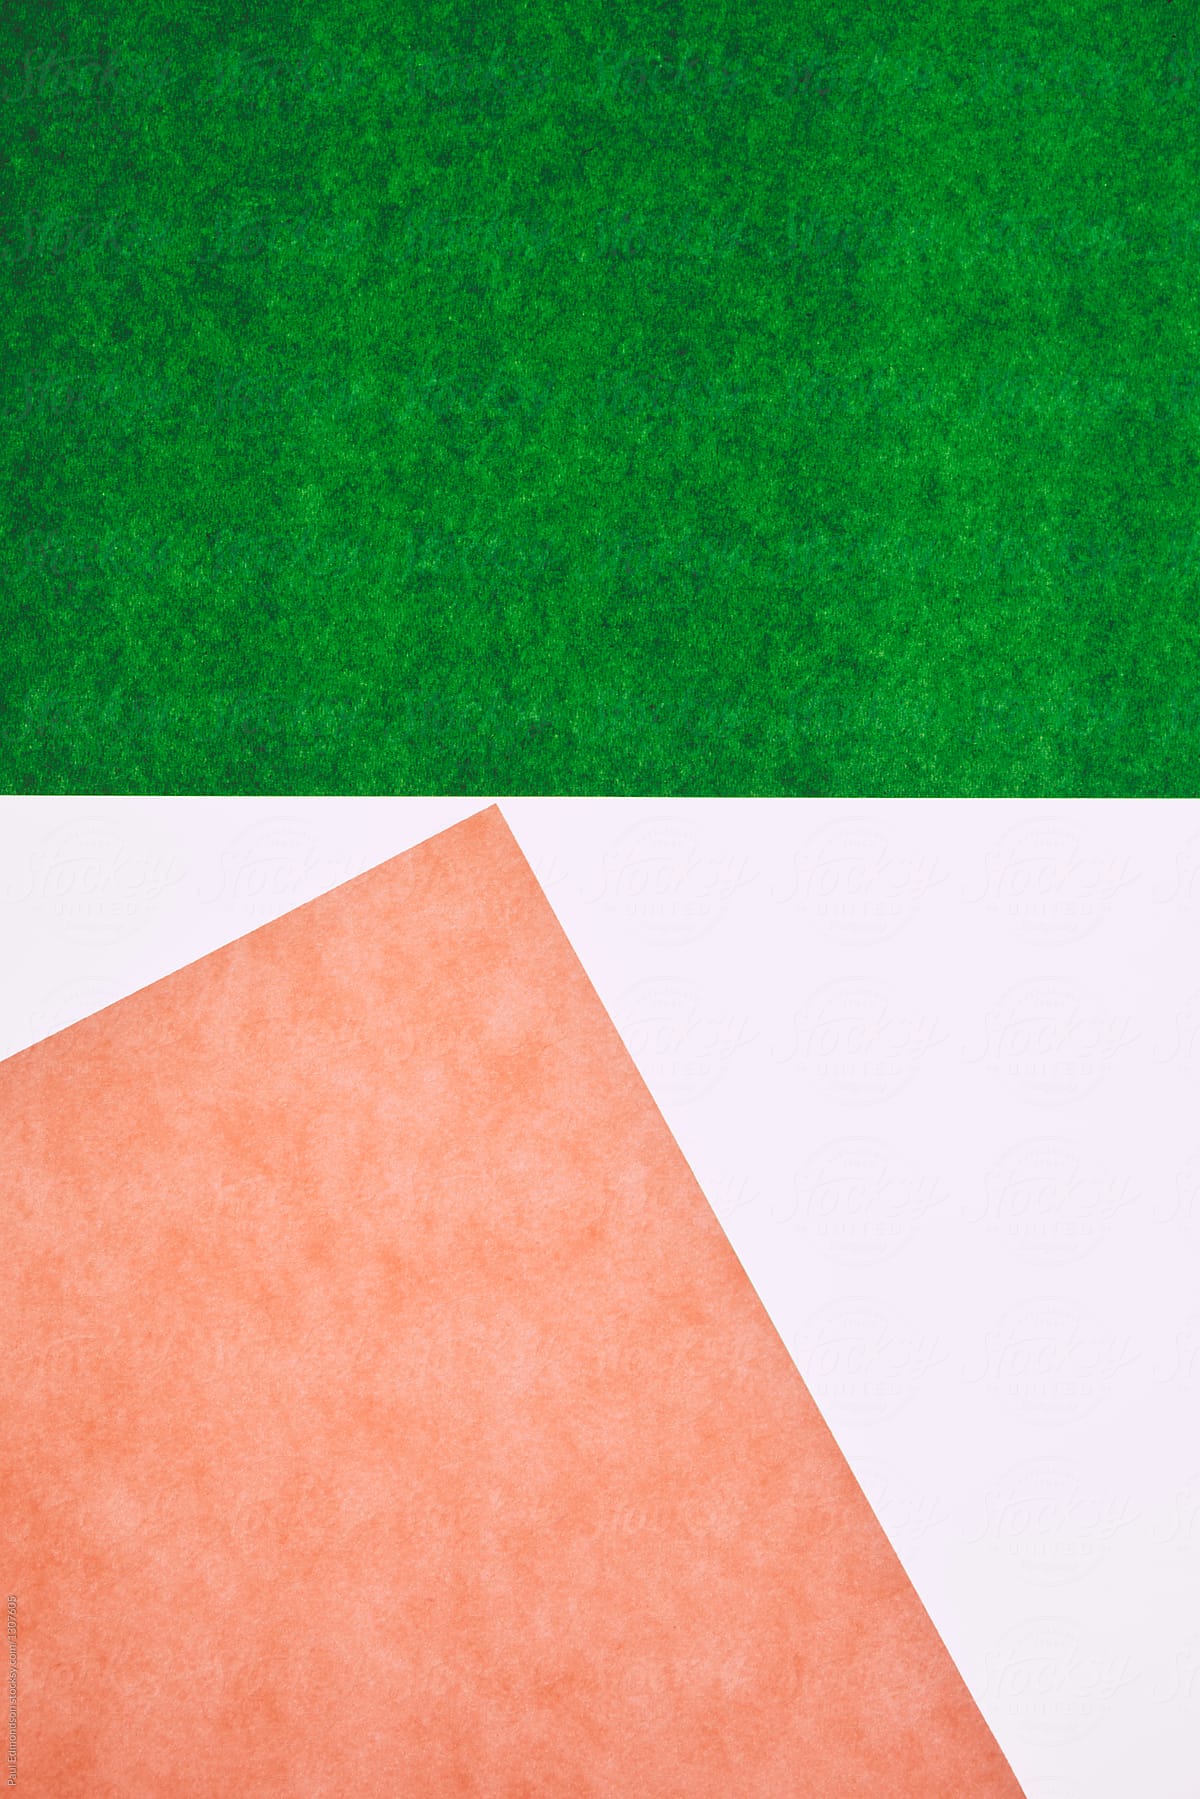 Detail of pink and green sheets of construction paper